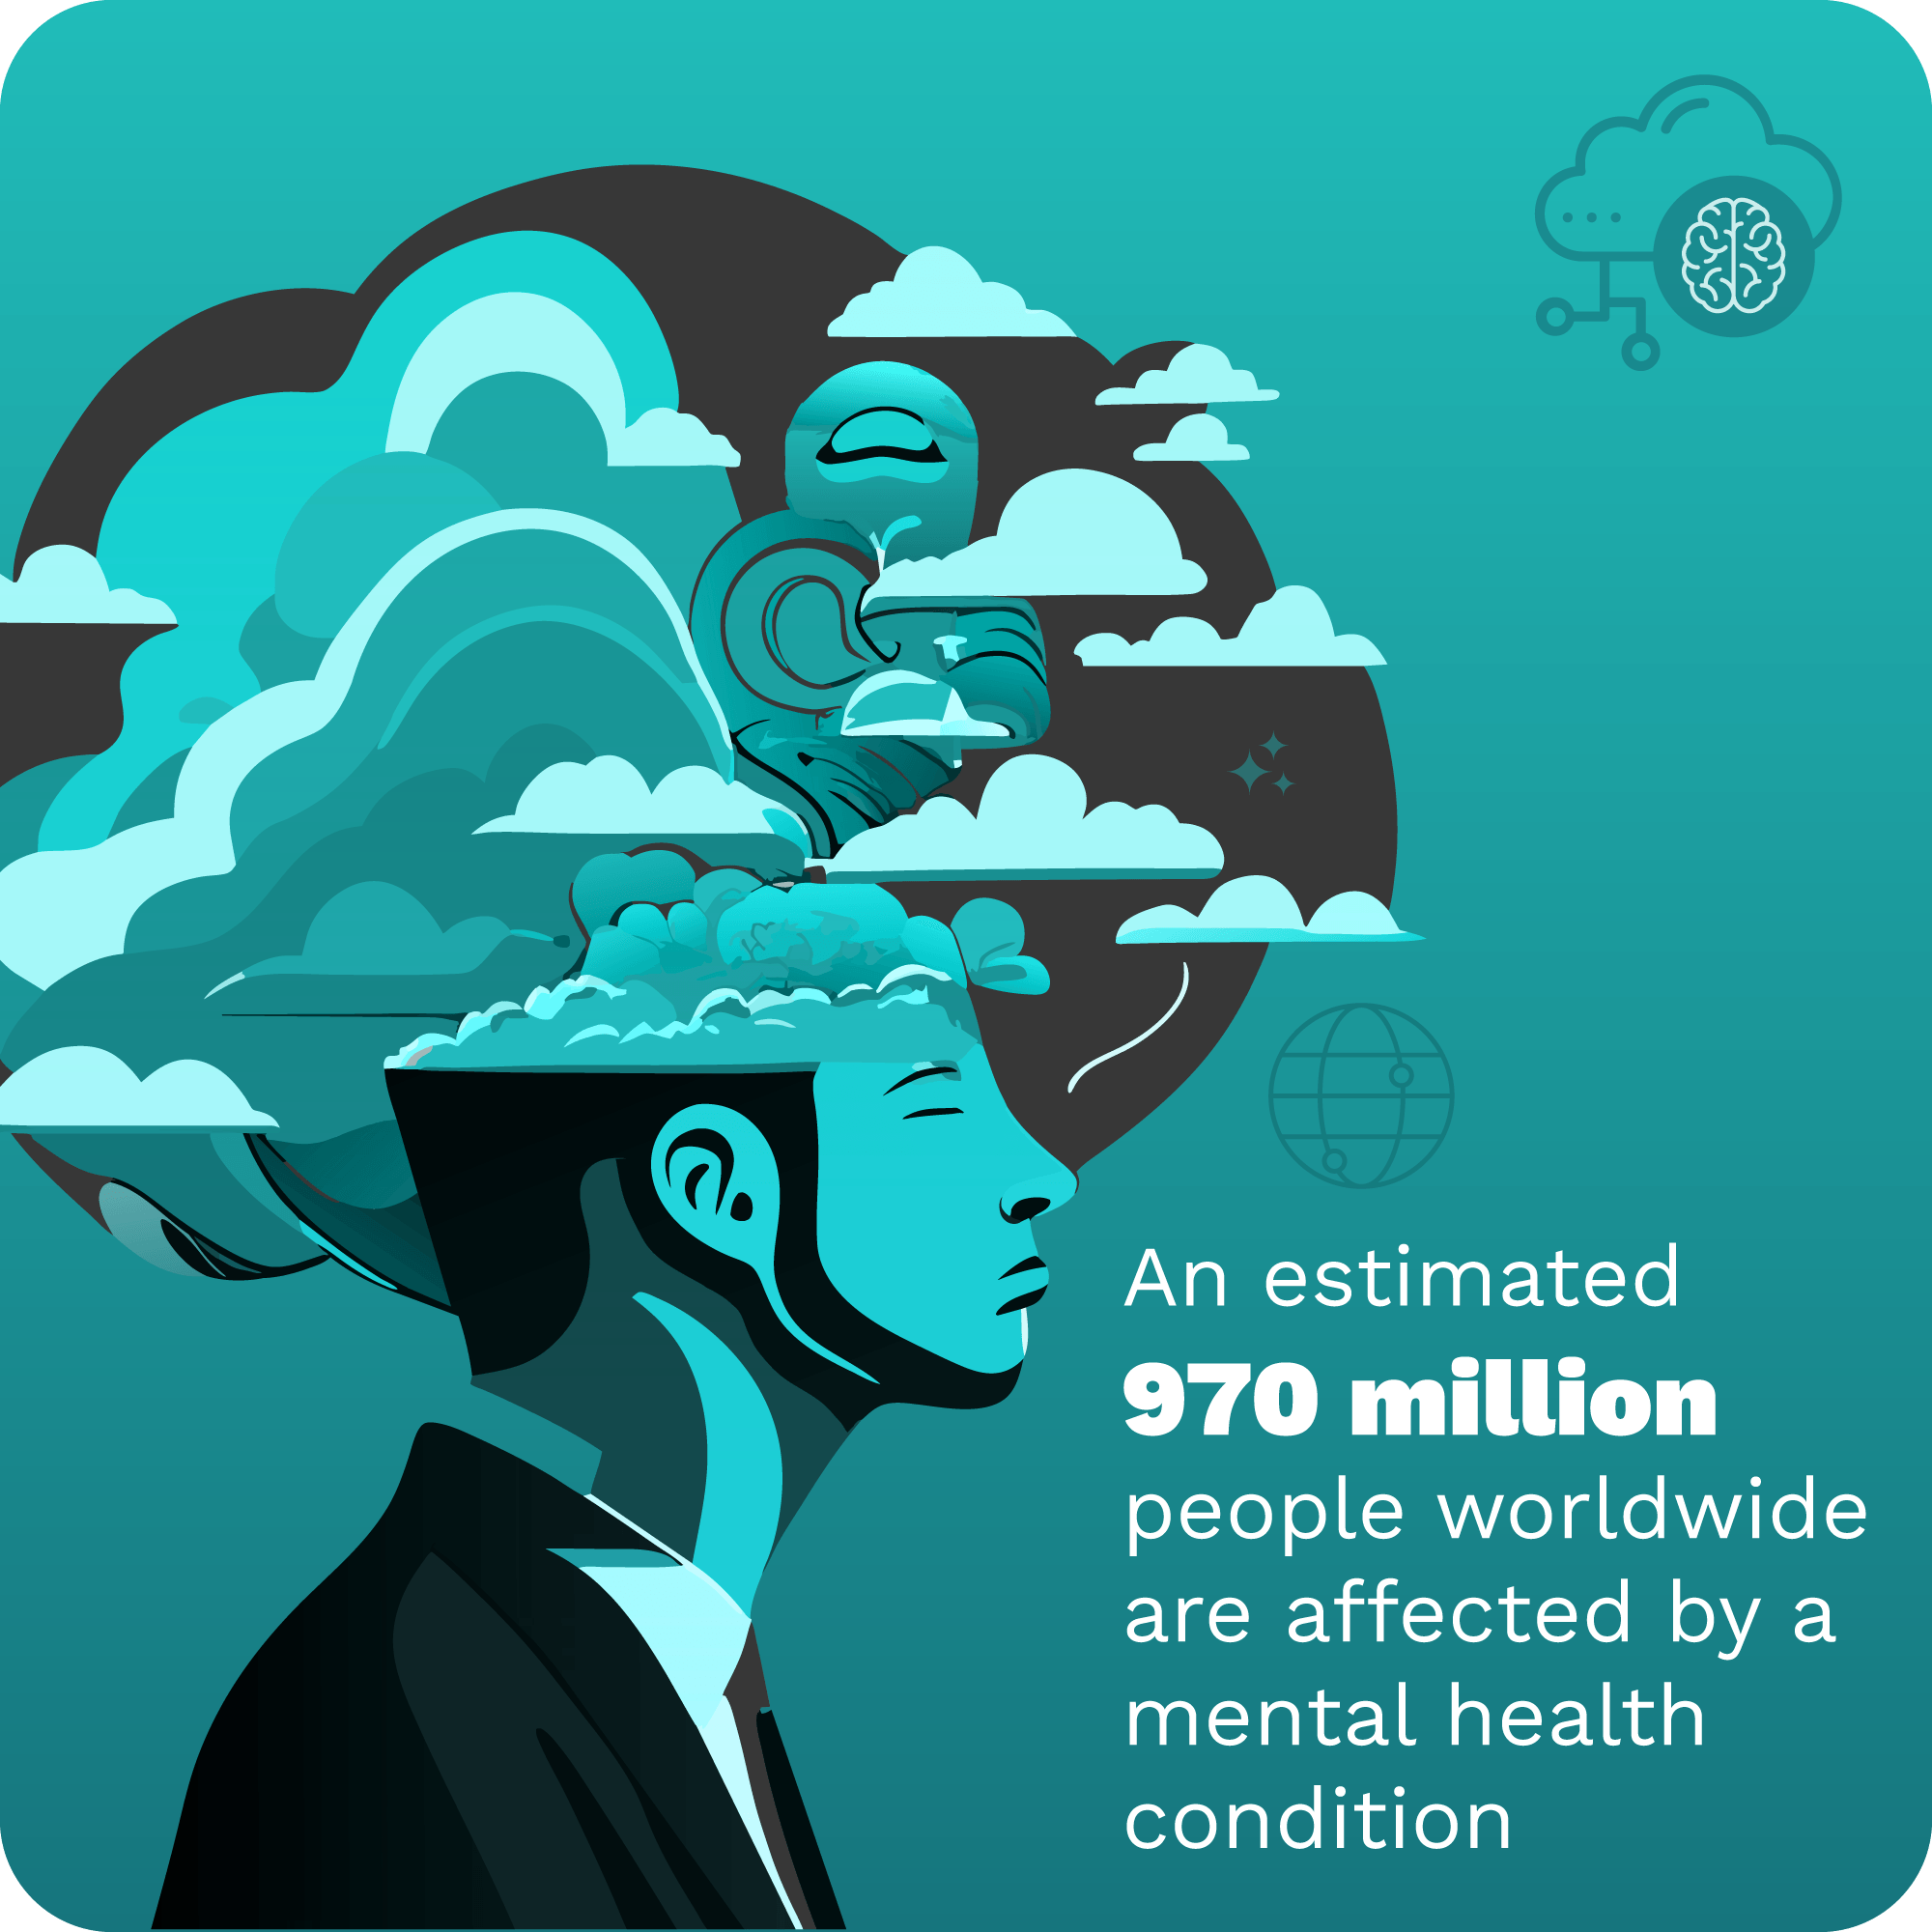 An estimated 970 million people worldwide are affected by a mental health condition